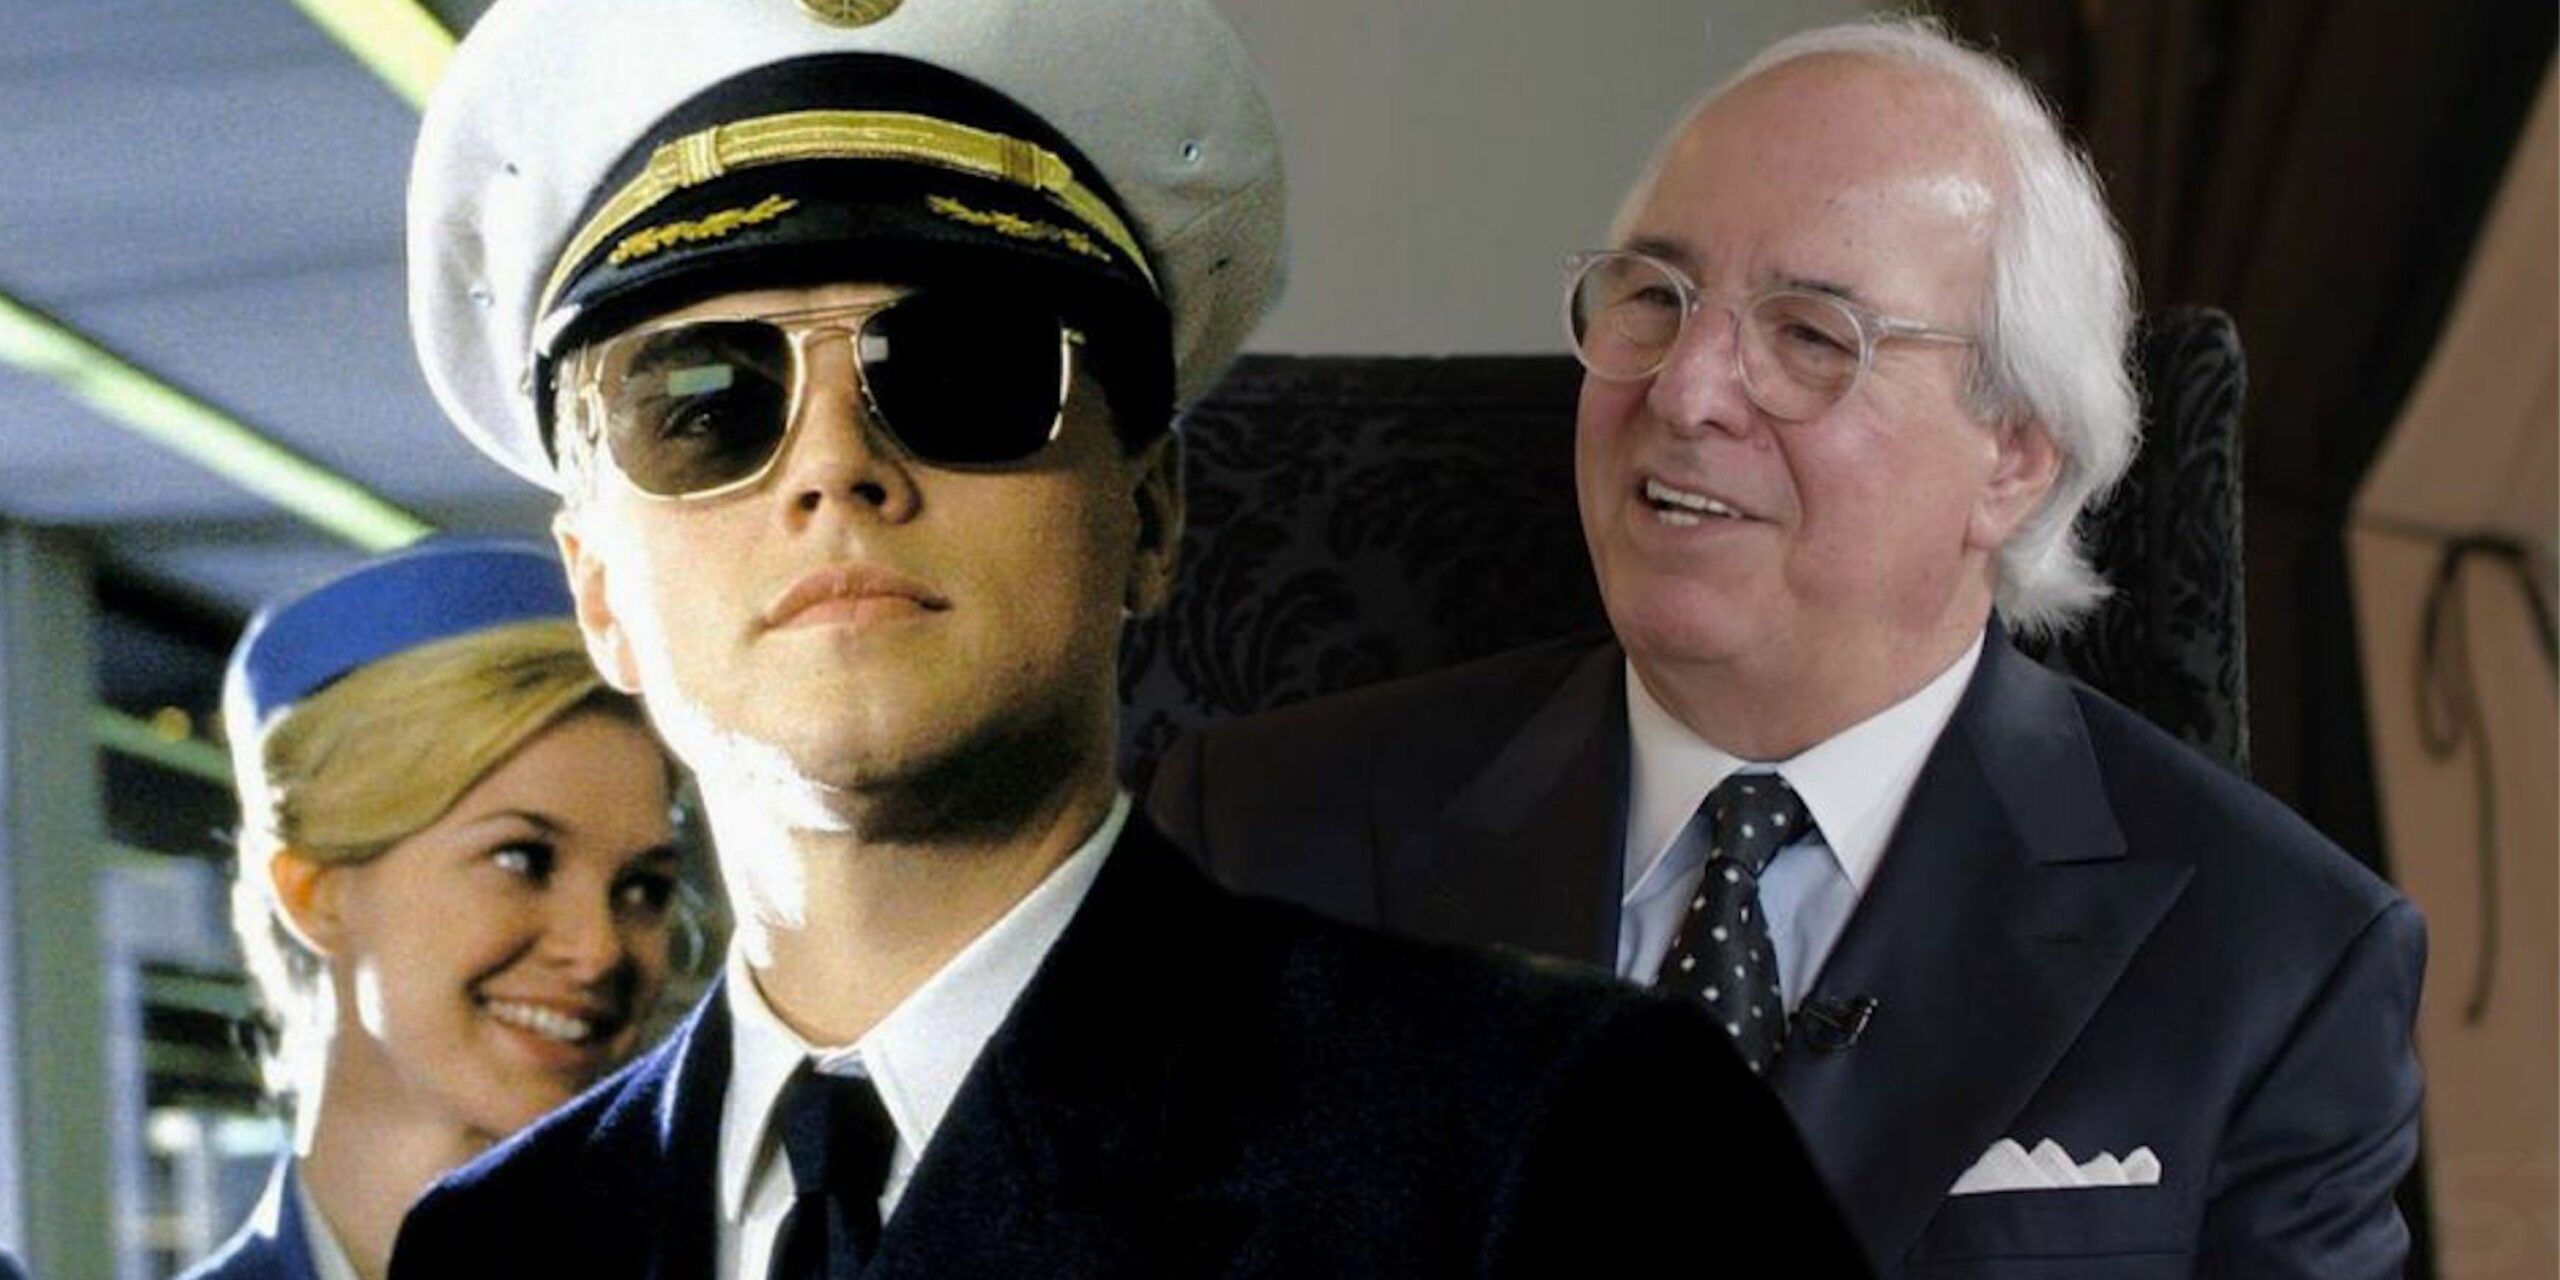 Catch Me If You Can: How Frank Abagnale Jr. Passed The Bar Exam